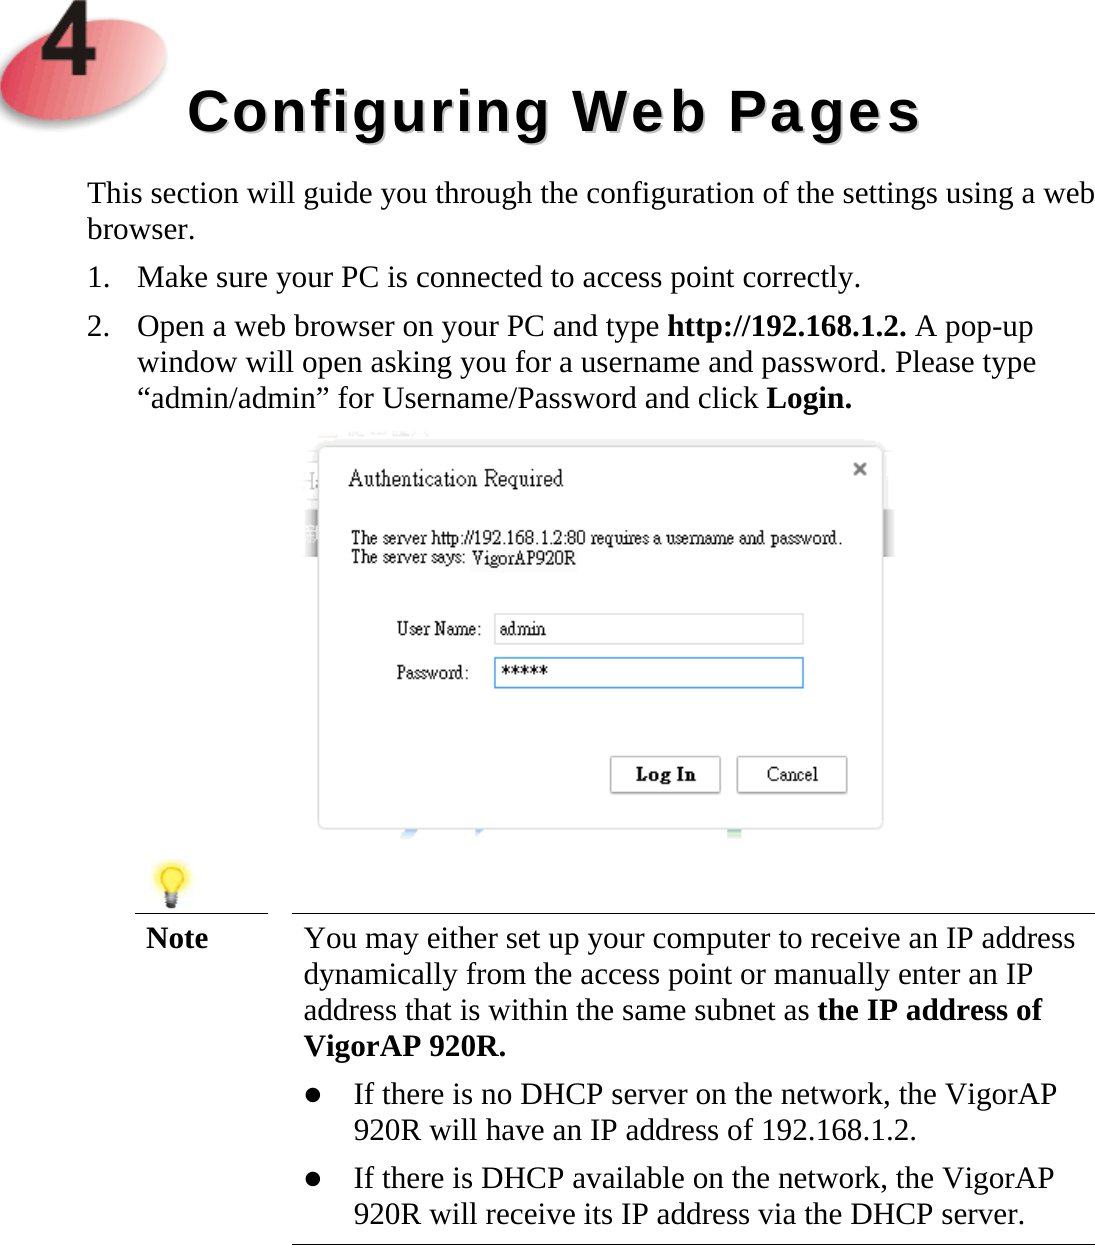     CCoonnffiigguurriinngg  WWeebb  PPaaggeess  This section will guide you through the configuration of the settings using a web browser. 1. Make sure your PC is connected to access point correctly. 2. Open a web browser on your PC and type http://192.168.1.2. A pop-up window will open asking you for a username and password. Please type “admin/admin” for Username/Password and click Login.    Note  You may either set up your computer to receive an IP address dynamically from the access point or manually enter an IP address that is within the same subnet as the IP address of VigorAP 920R.  If there is no DHCP server on the network, the VigorAP 920R will have an IP address of 192.168.1.2.  If there is DHCP available on the network, the VigorAP 920R will receive its IP address via the DHCP server.     